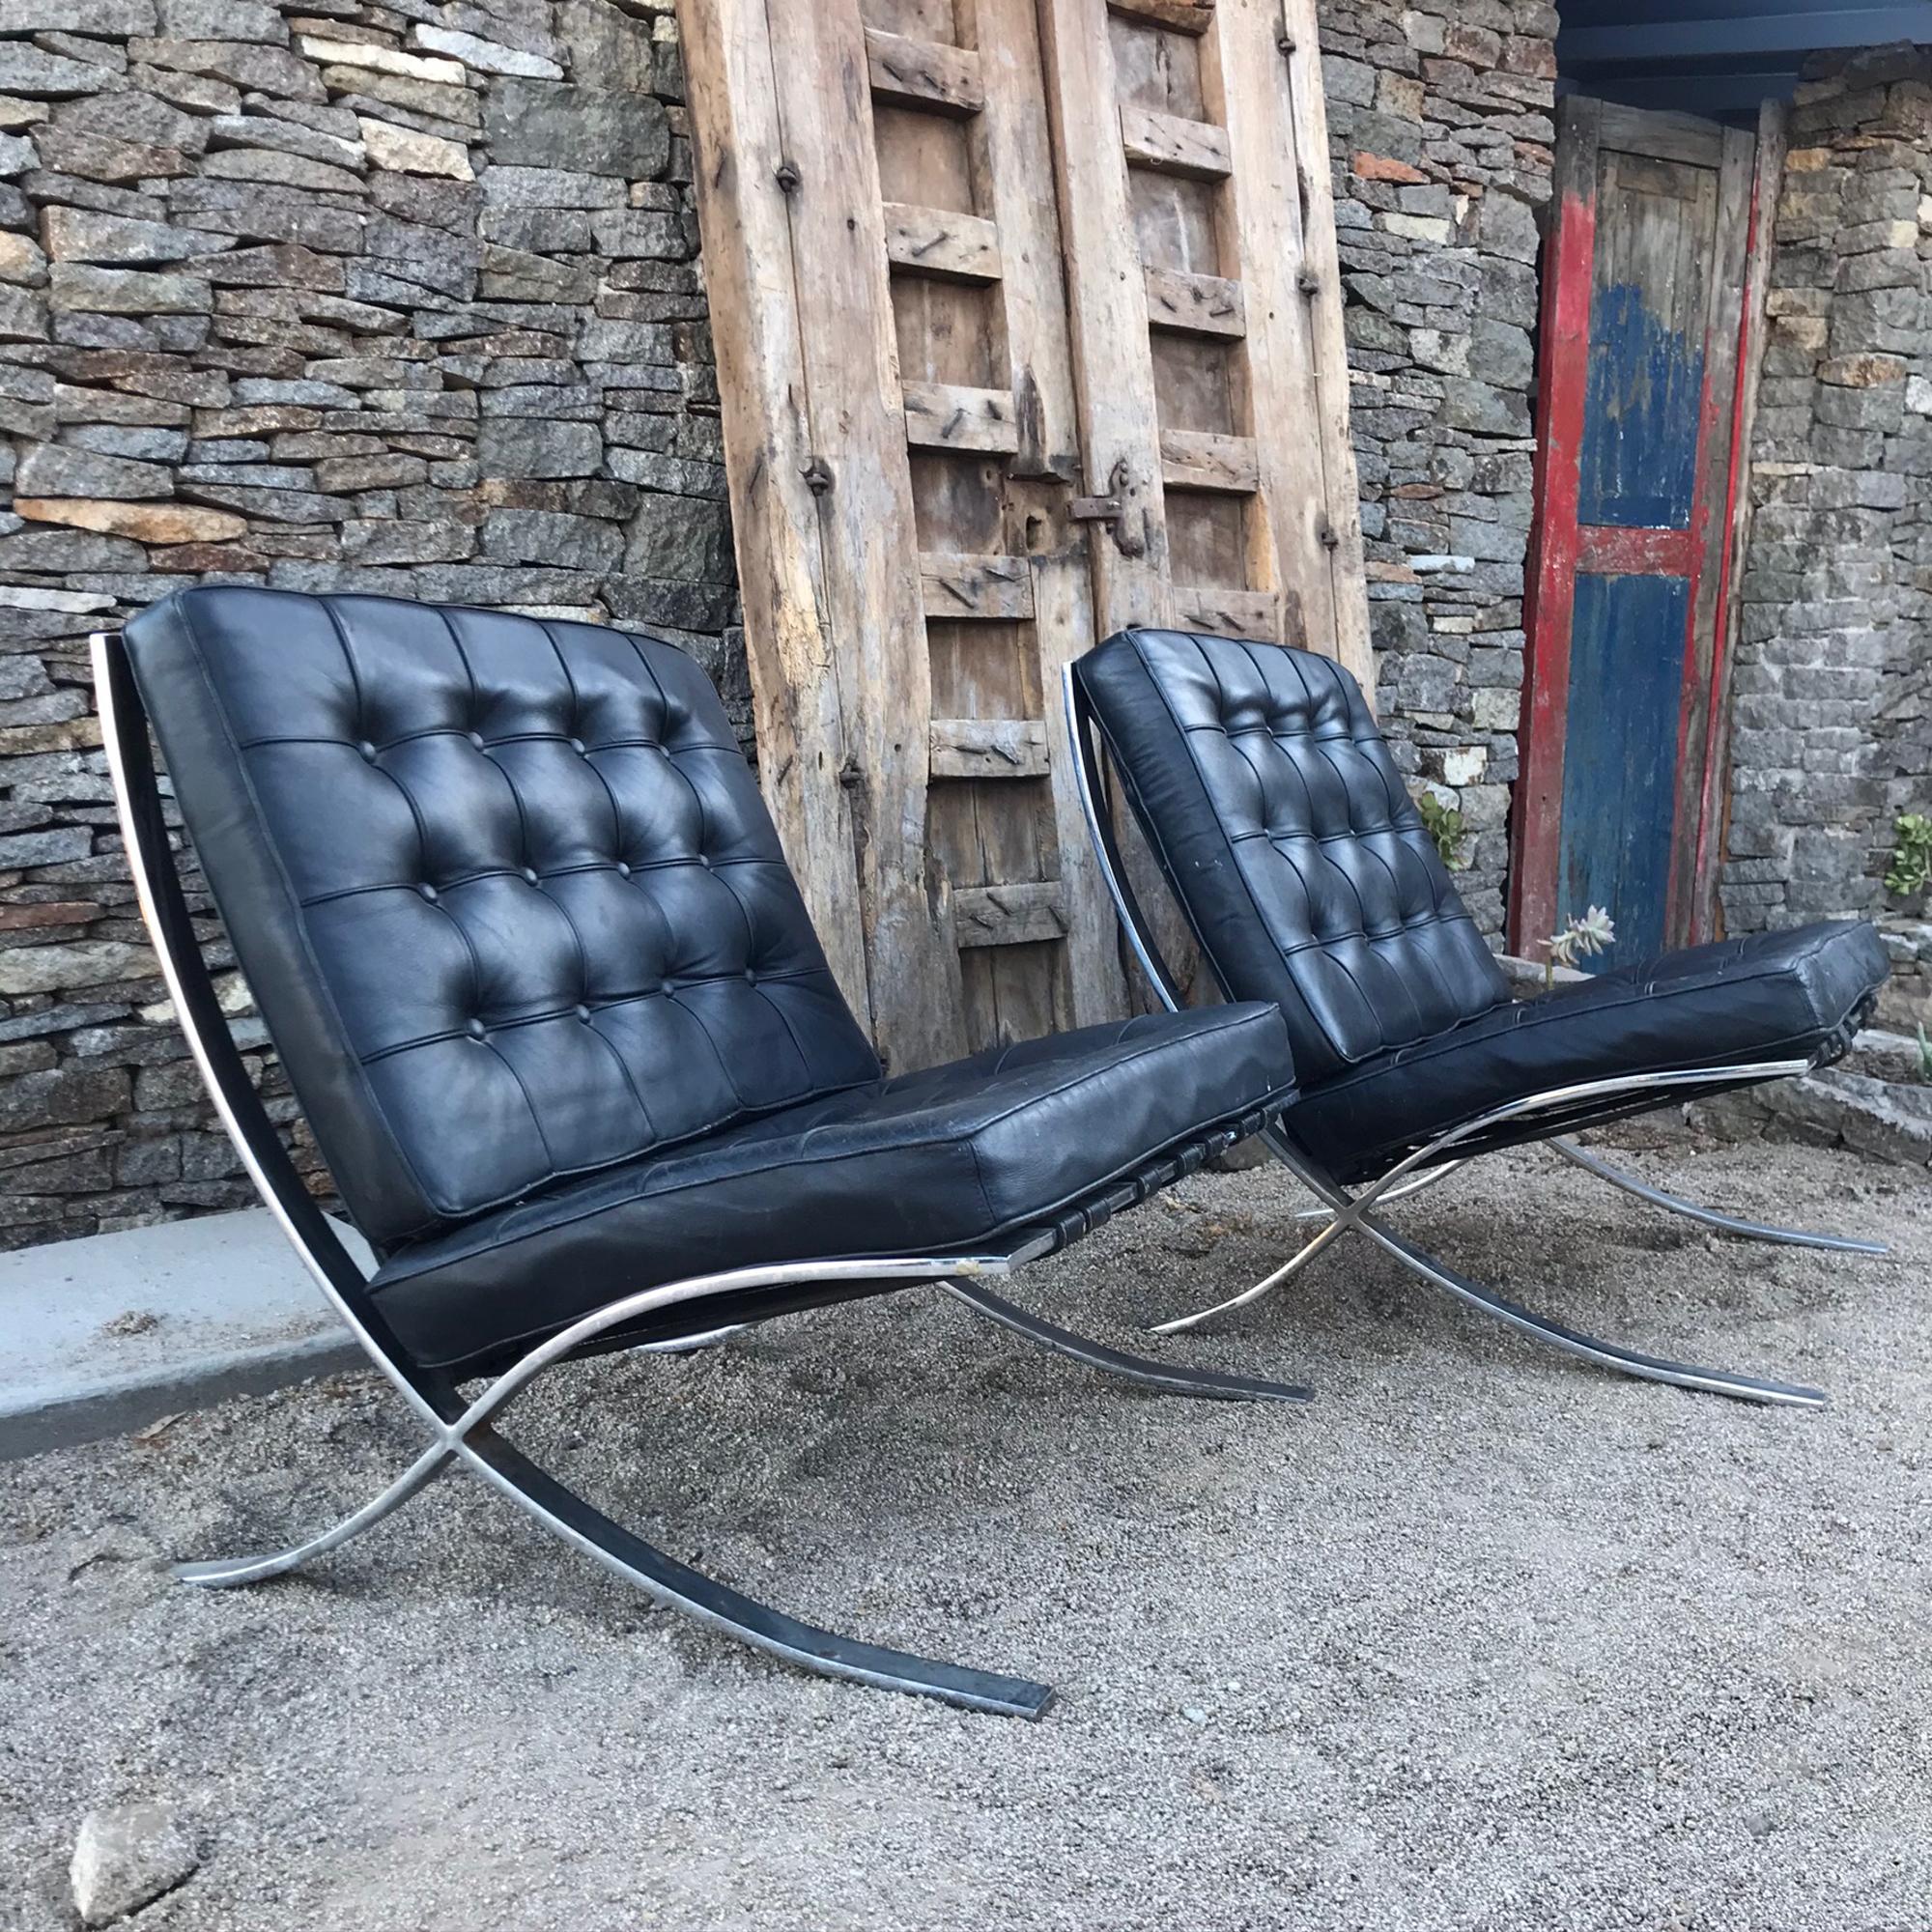 A pair of iconic black leather vintage Barcelona chairs with chrome-plated steel frame designed by Ludwig Mies van der Rohe, 1970s.
Epitome of class and style. The hippest statement ever!
No label present from the maker.
Expect vintage wear. Chrome